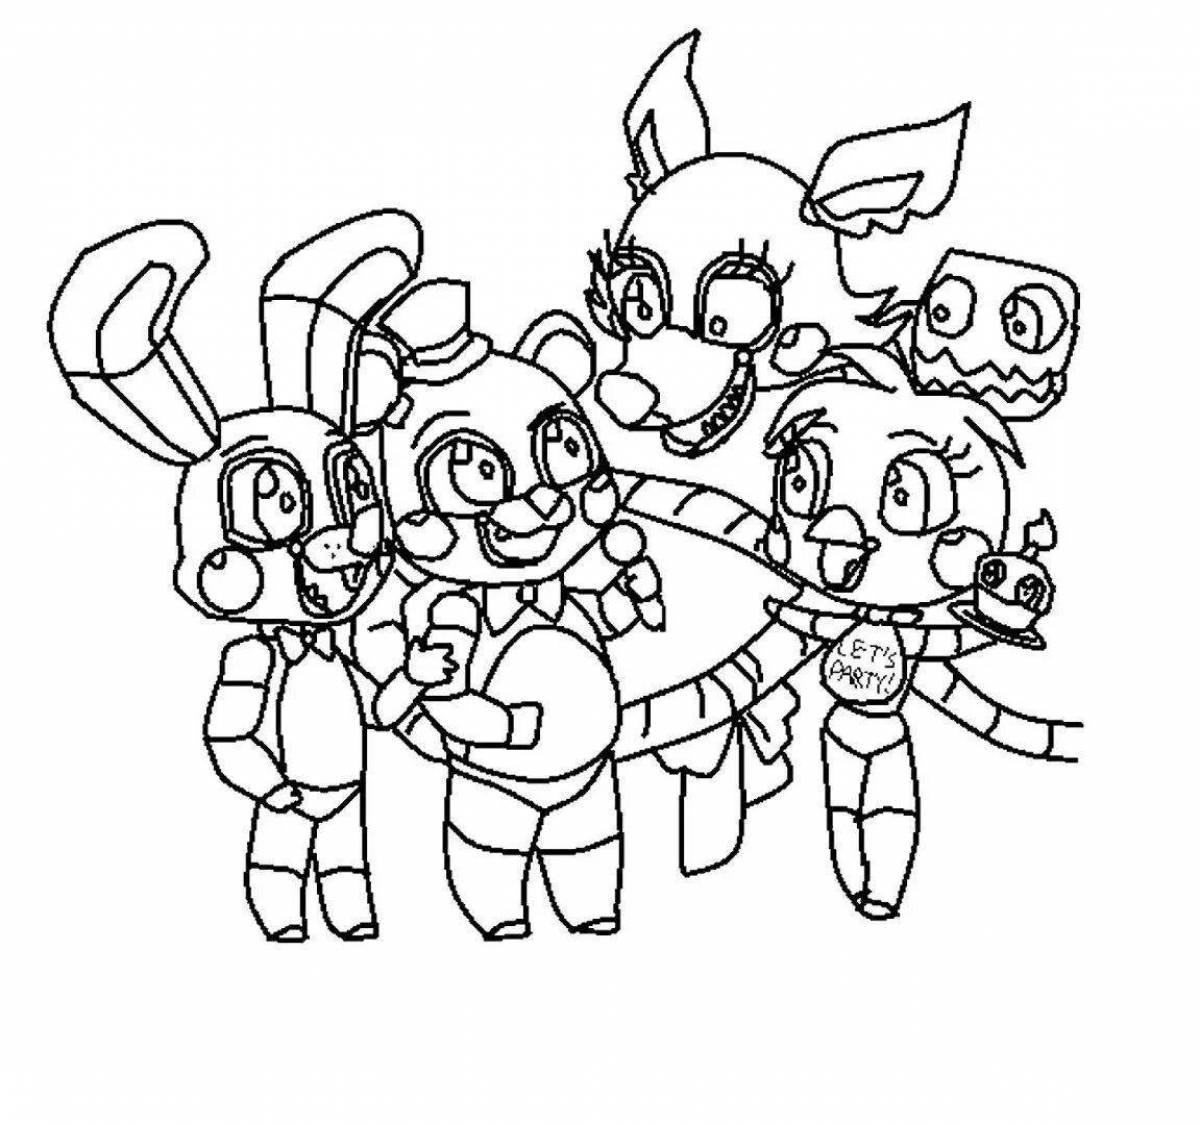 Exciting vanessa fnaf coloring book